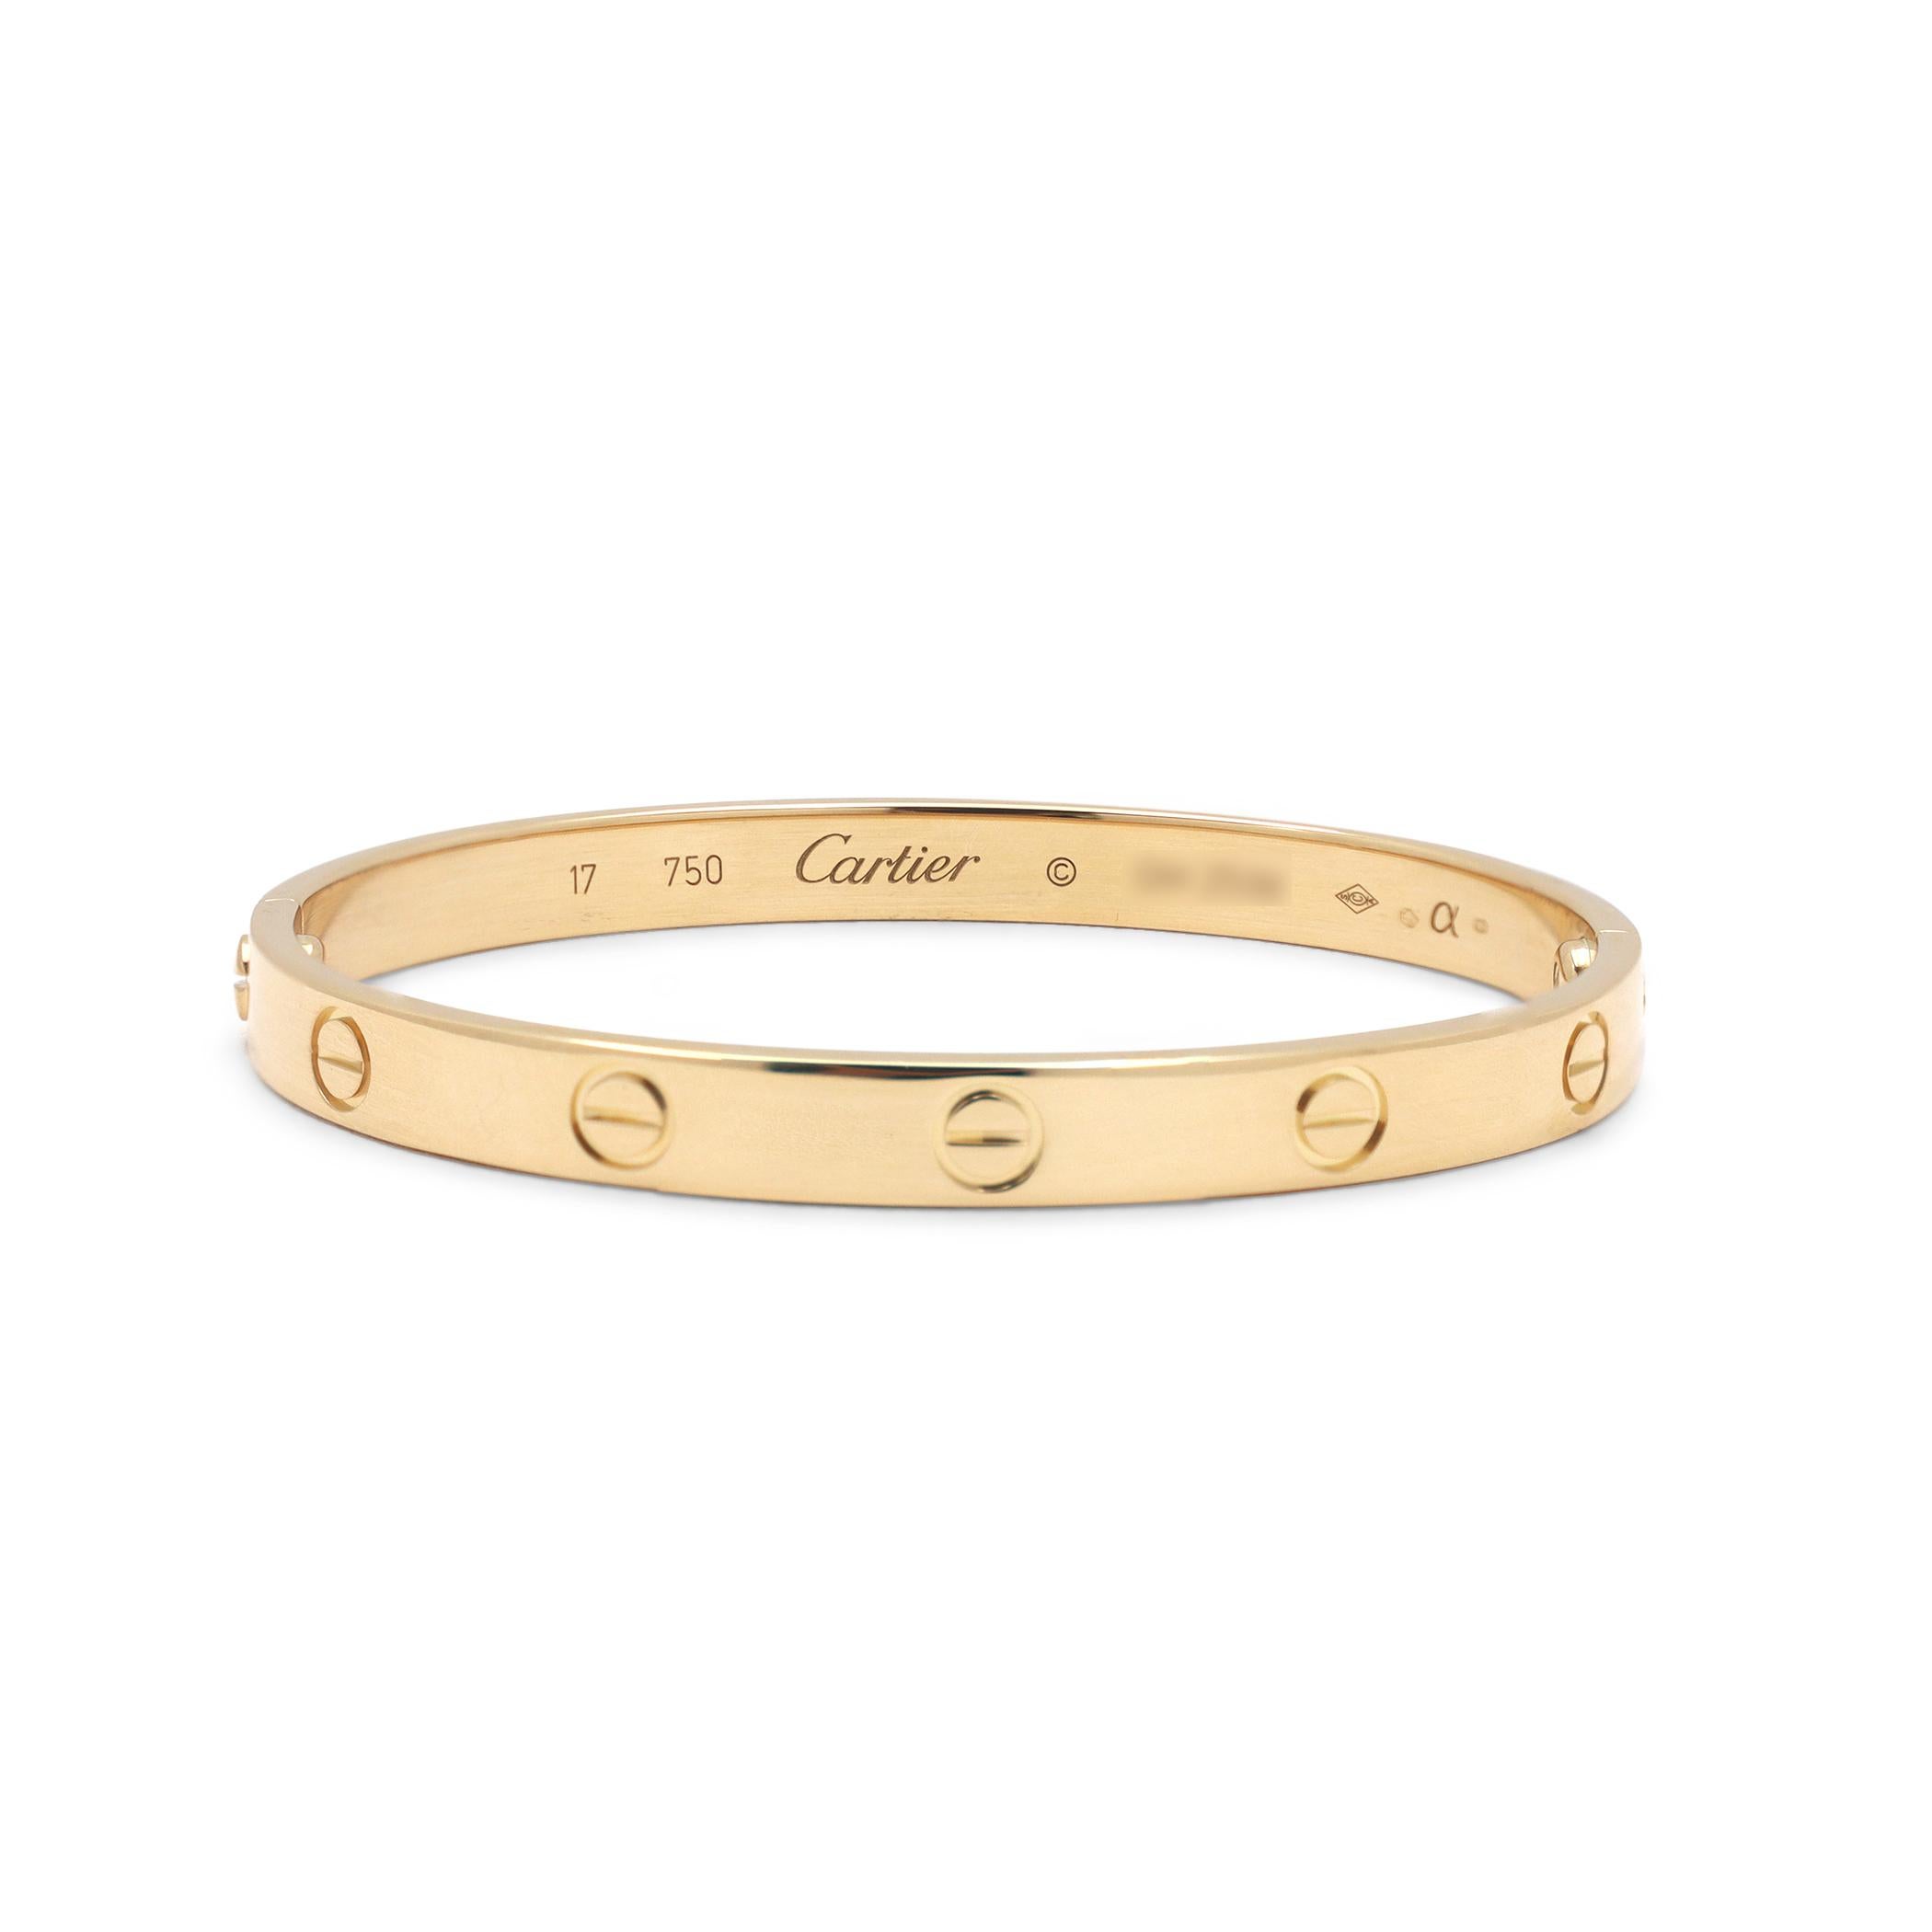 Authentic Cartier 'Love' bracelet crafted in 18 karat yellow gold. Size 17. Signed Cartier, 17, Au750, with serial number and hallmarks. The bracelet is presented with the original box, papers and screwdriver. CIRCA 2000s.

Original Box: